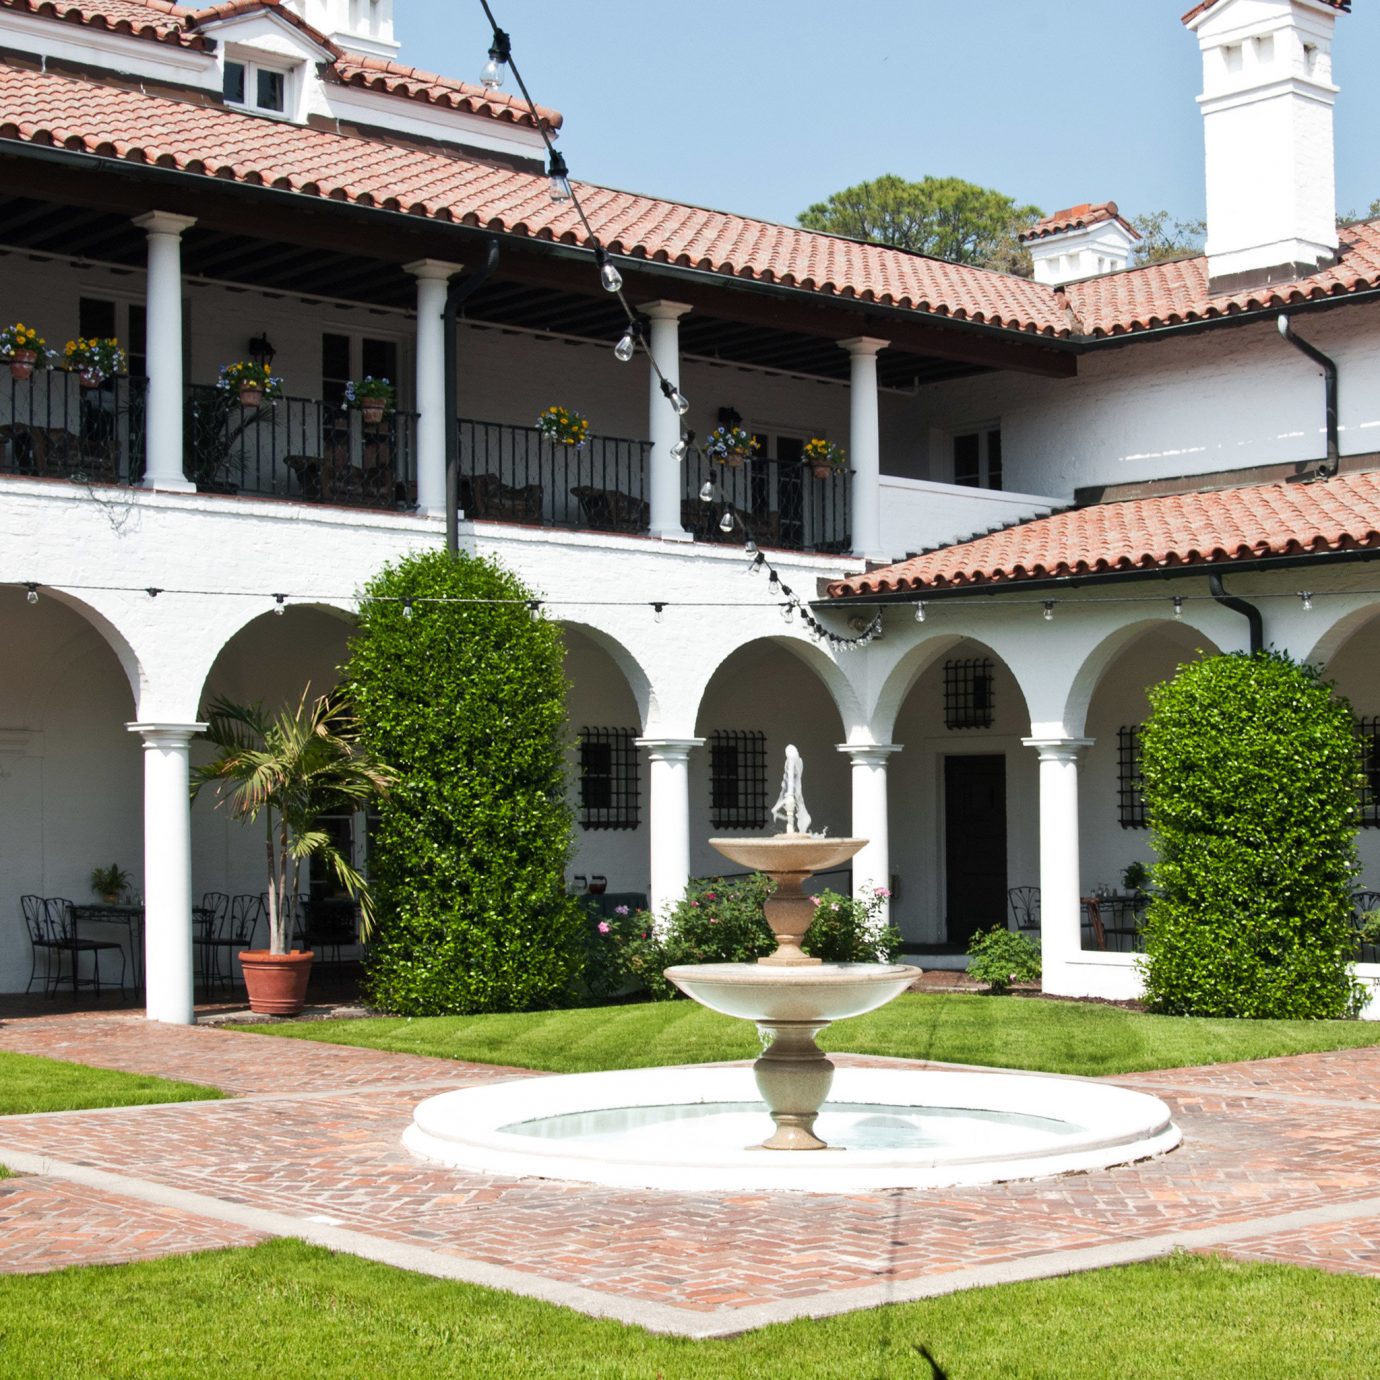 Buildings Classic Courtyard Exterior Historic building sky grass house property Architecture old mansion Villa hacienda home palace stone colonnade